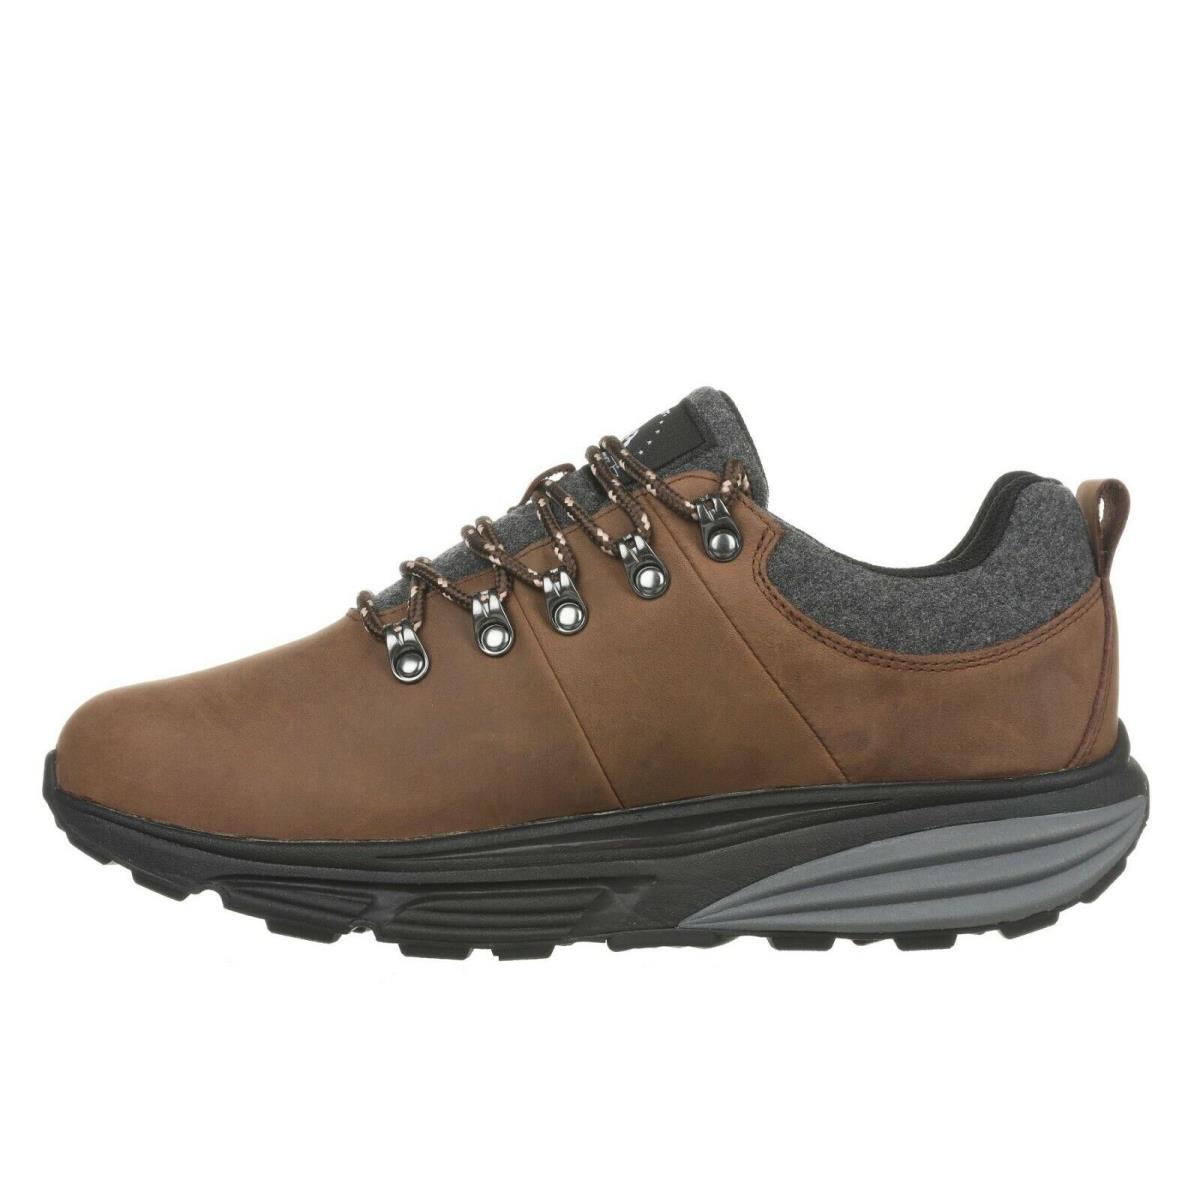 MBT shoes ALPINE - CHOCOLATE BROWN-GORE-TEX 2